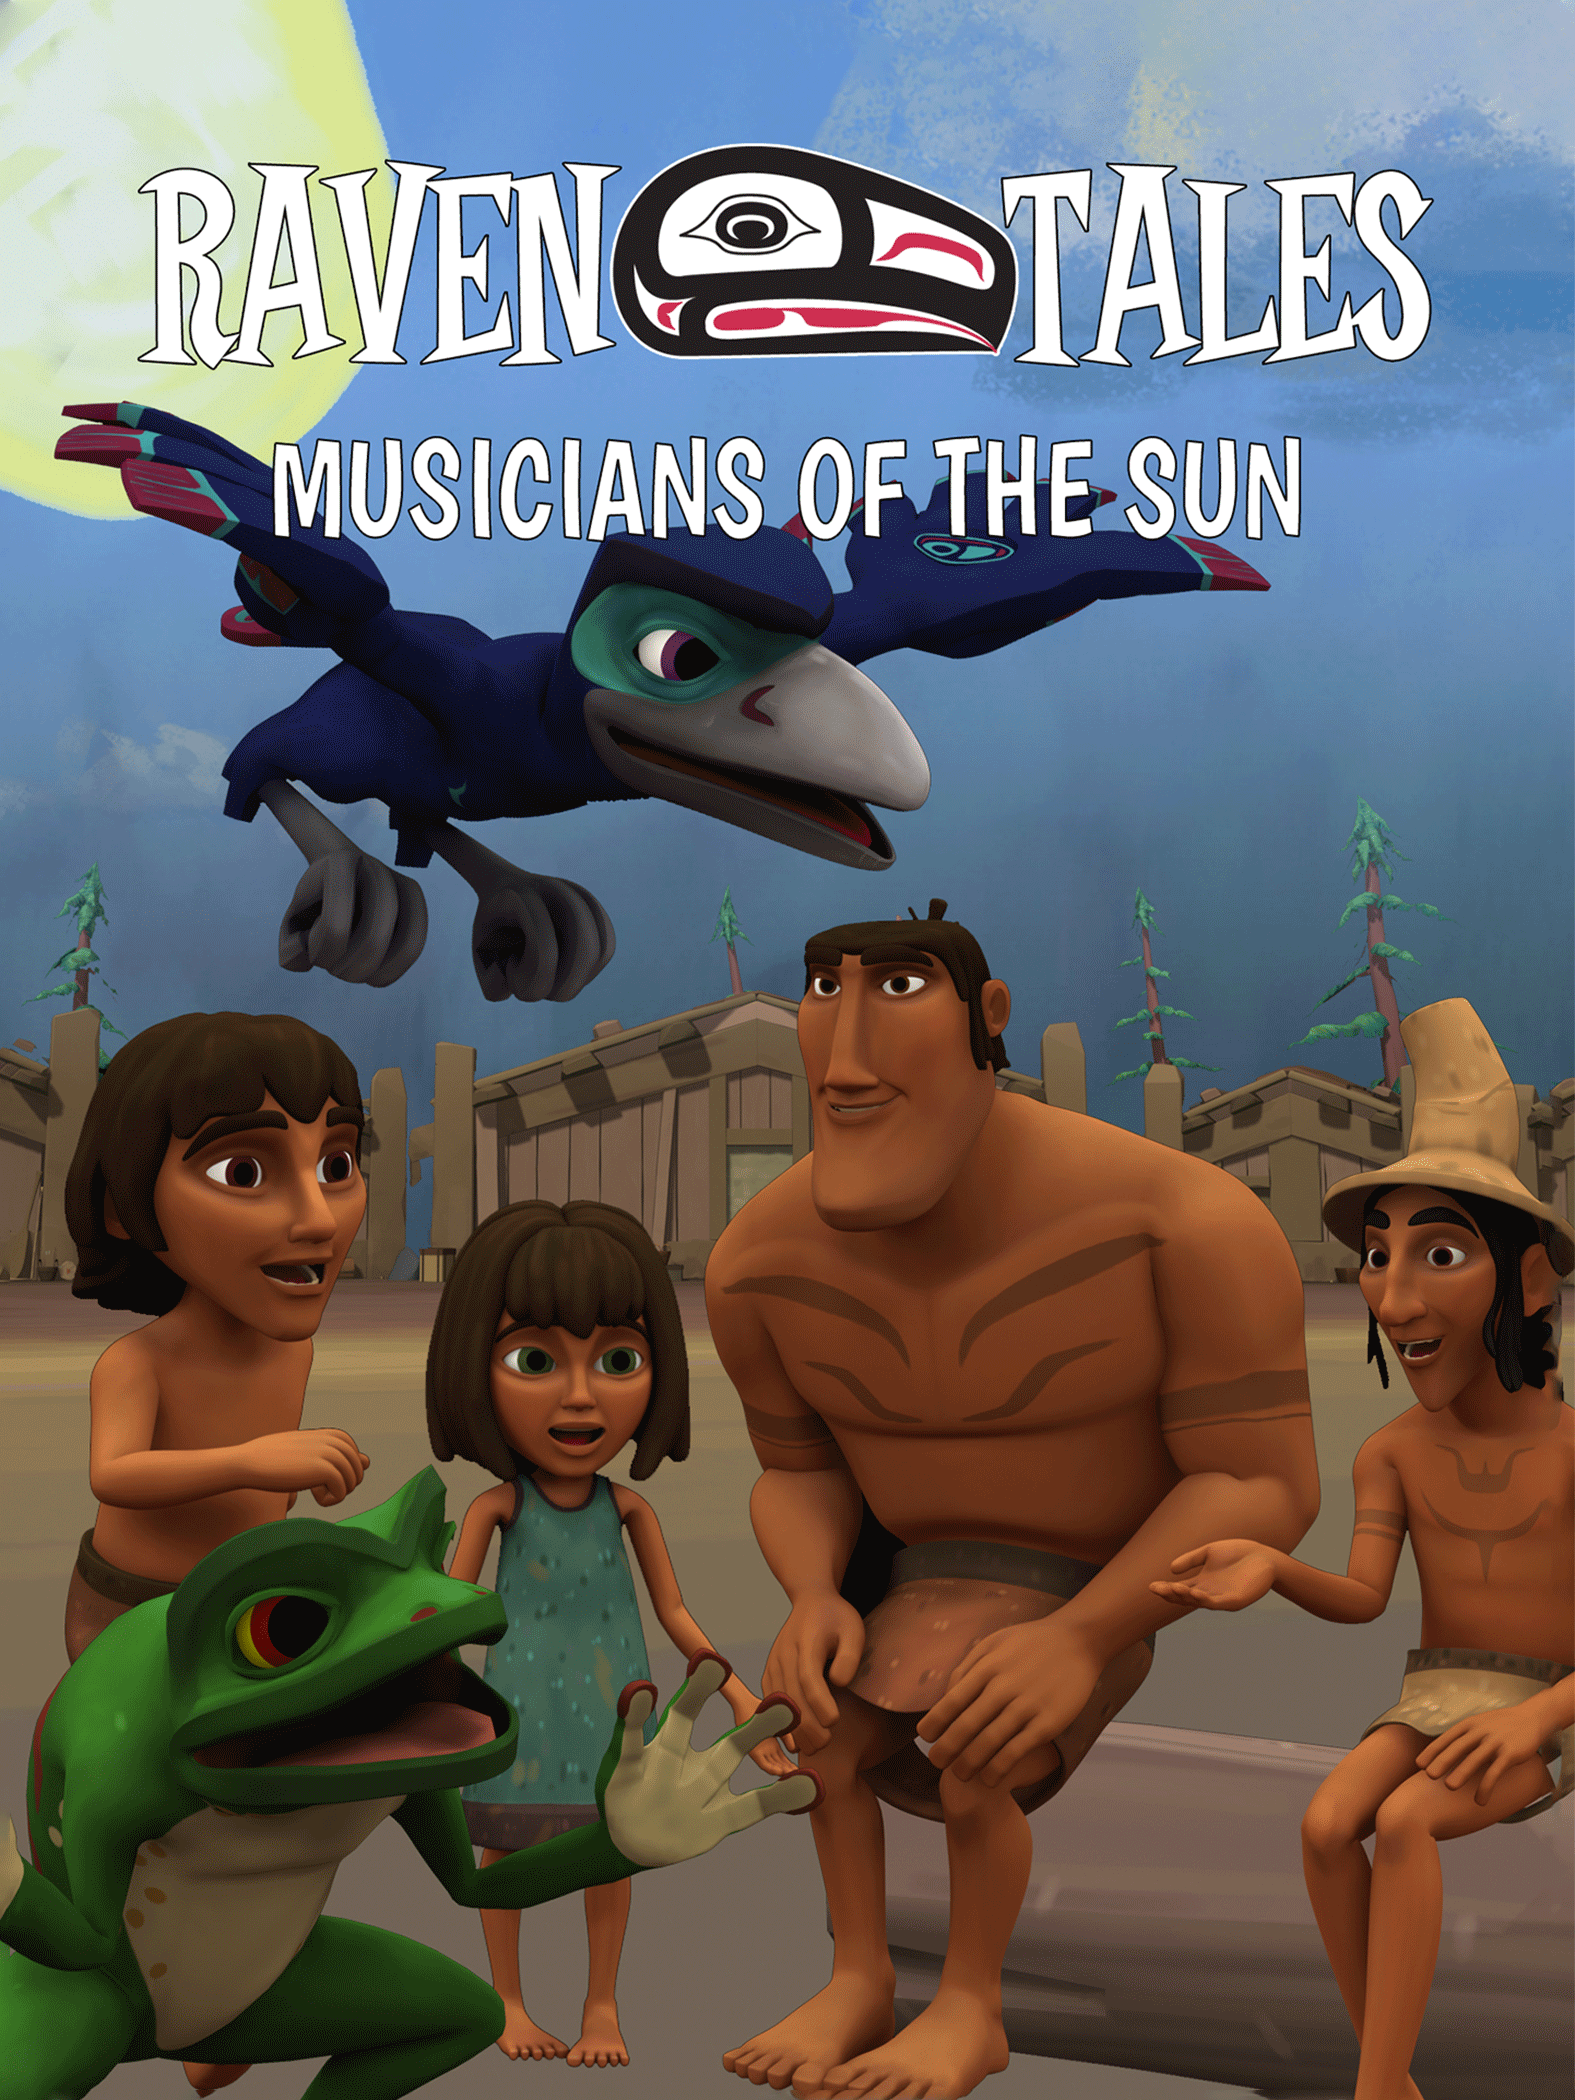 Raven Tales: Musicians of the Sun